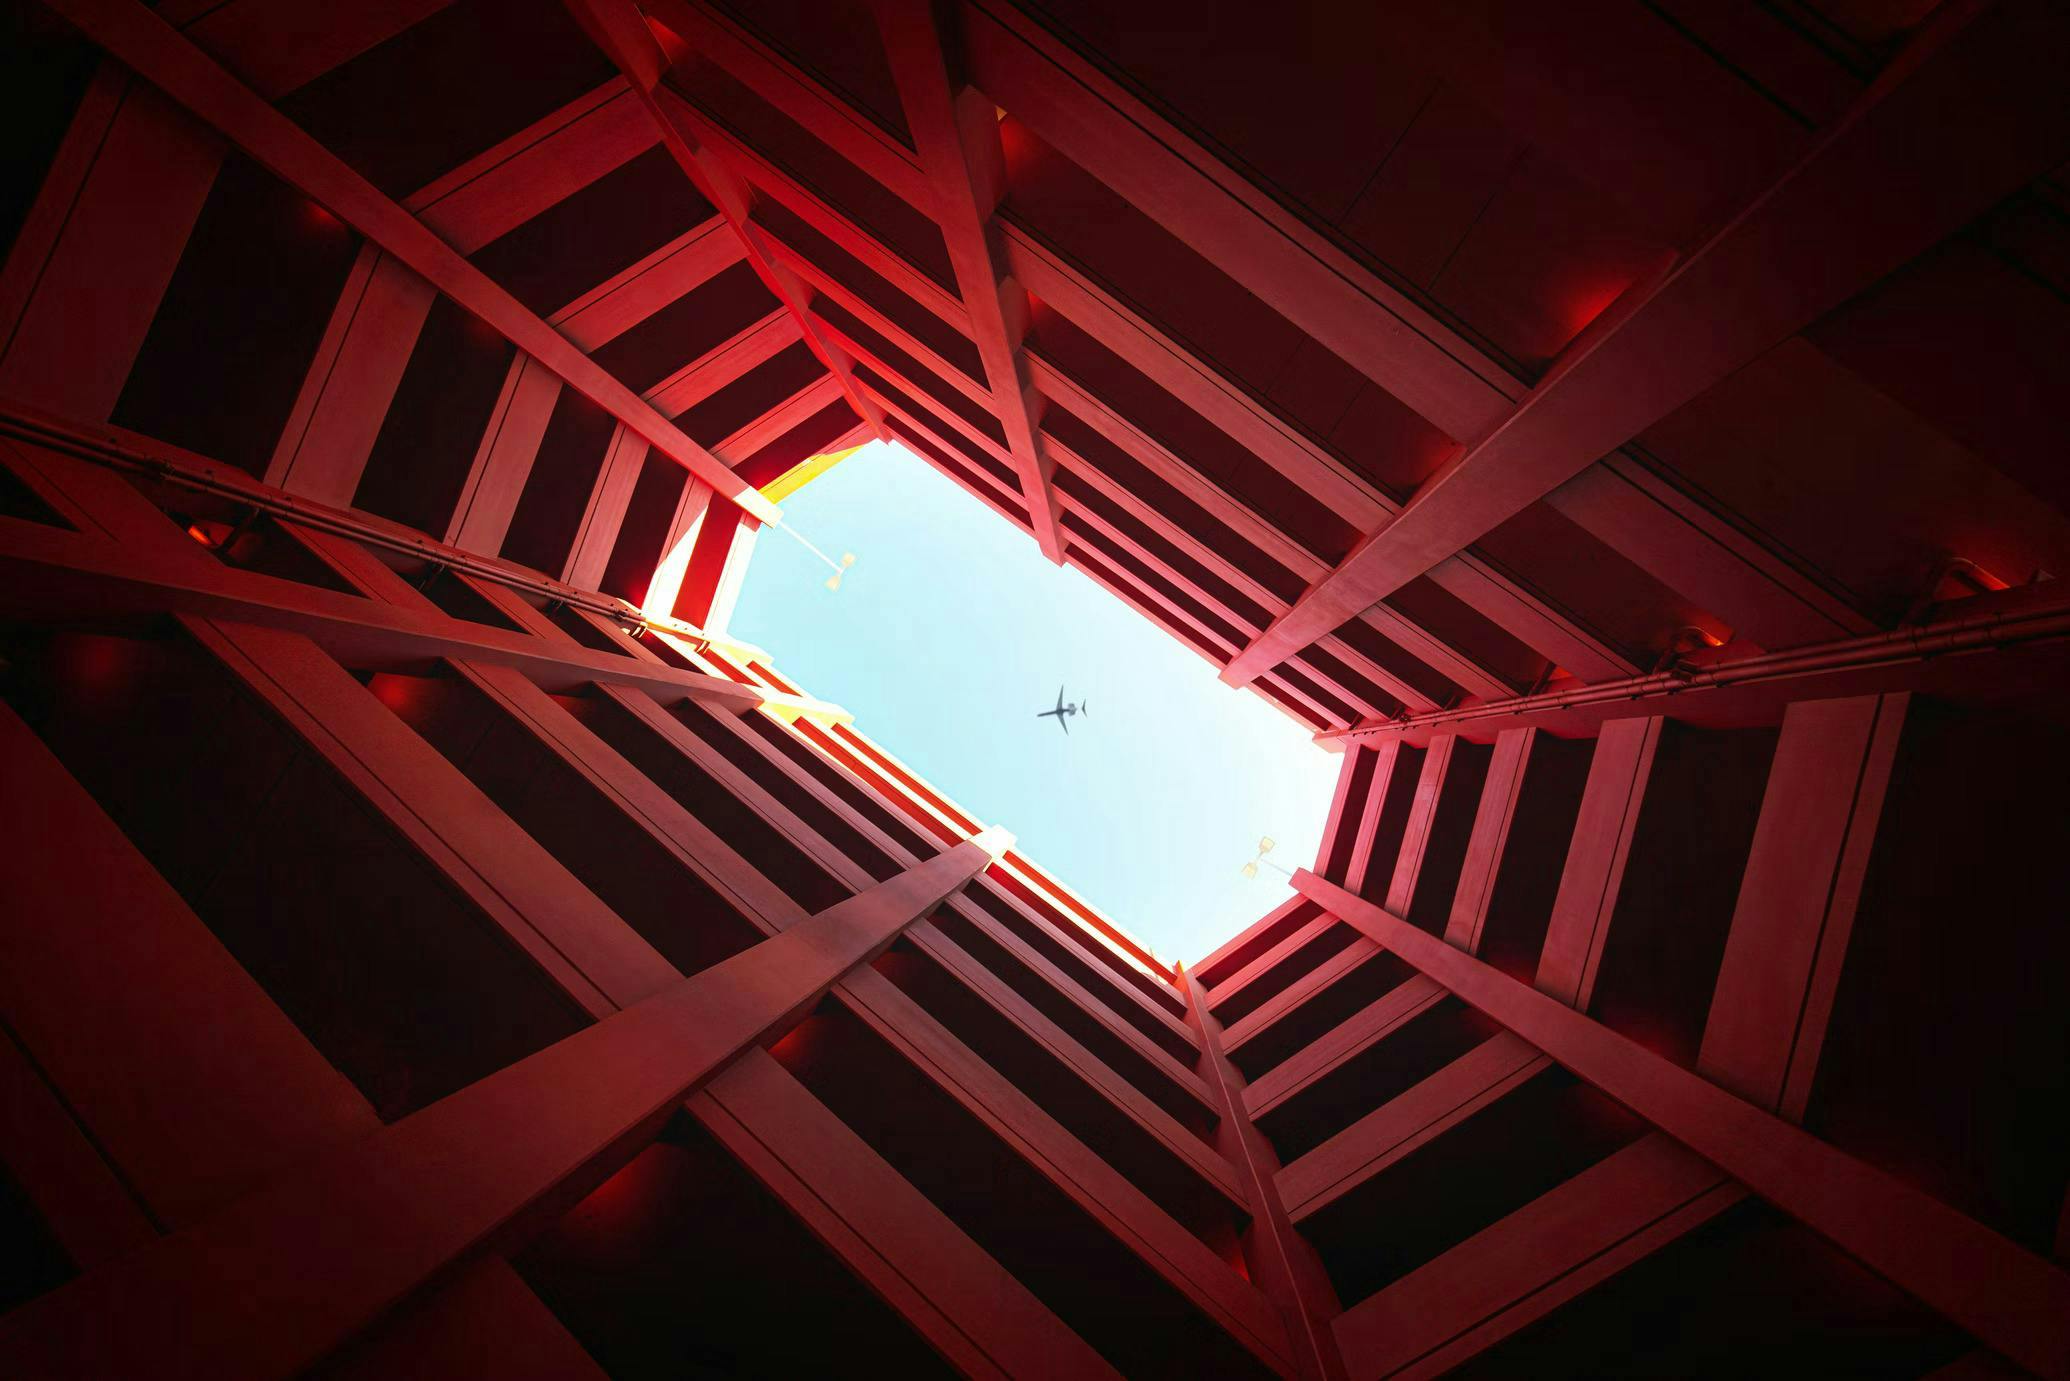 An airplane flies overhead, visible through a symmetrical red architectural structure's opening, with sunlight illuminating the edges, set against a clear blue sky.